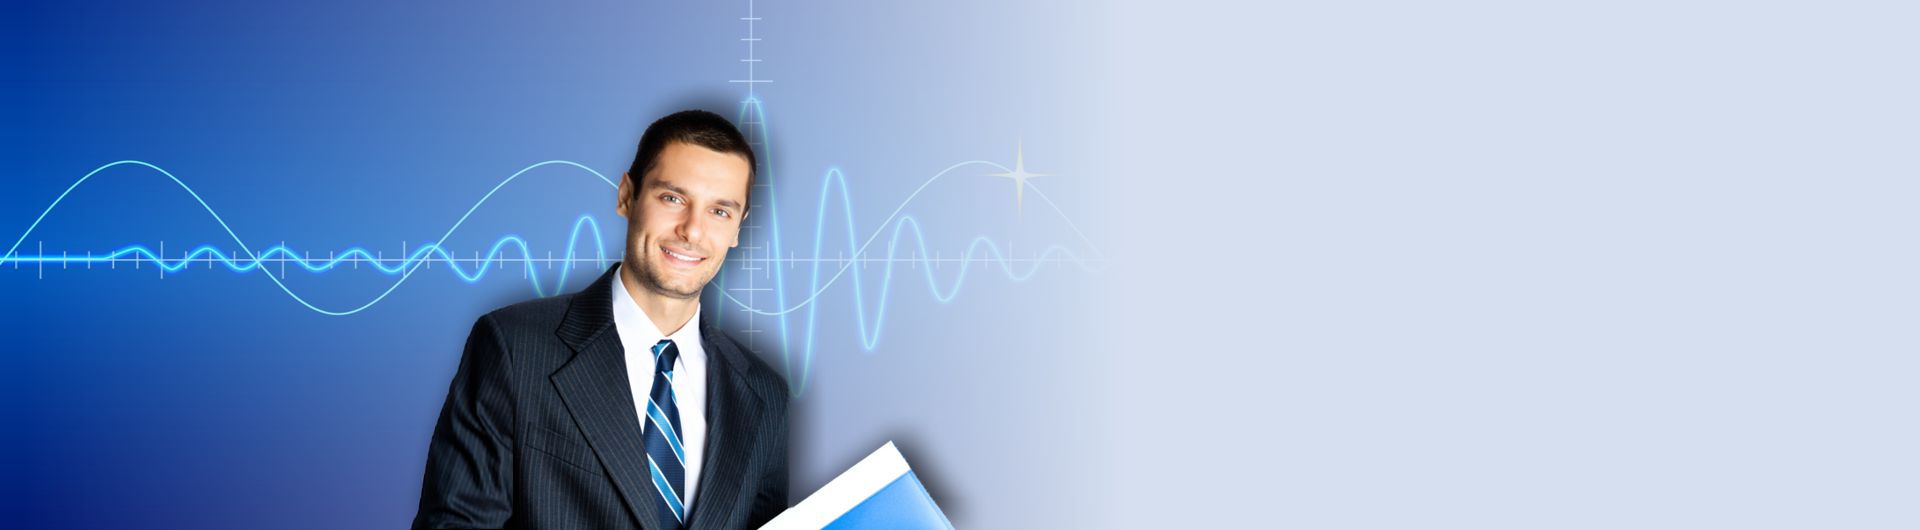 photo of man smiling in front of sine wave